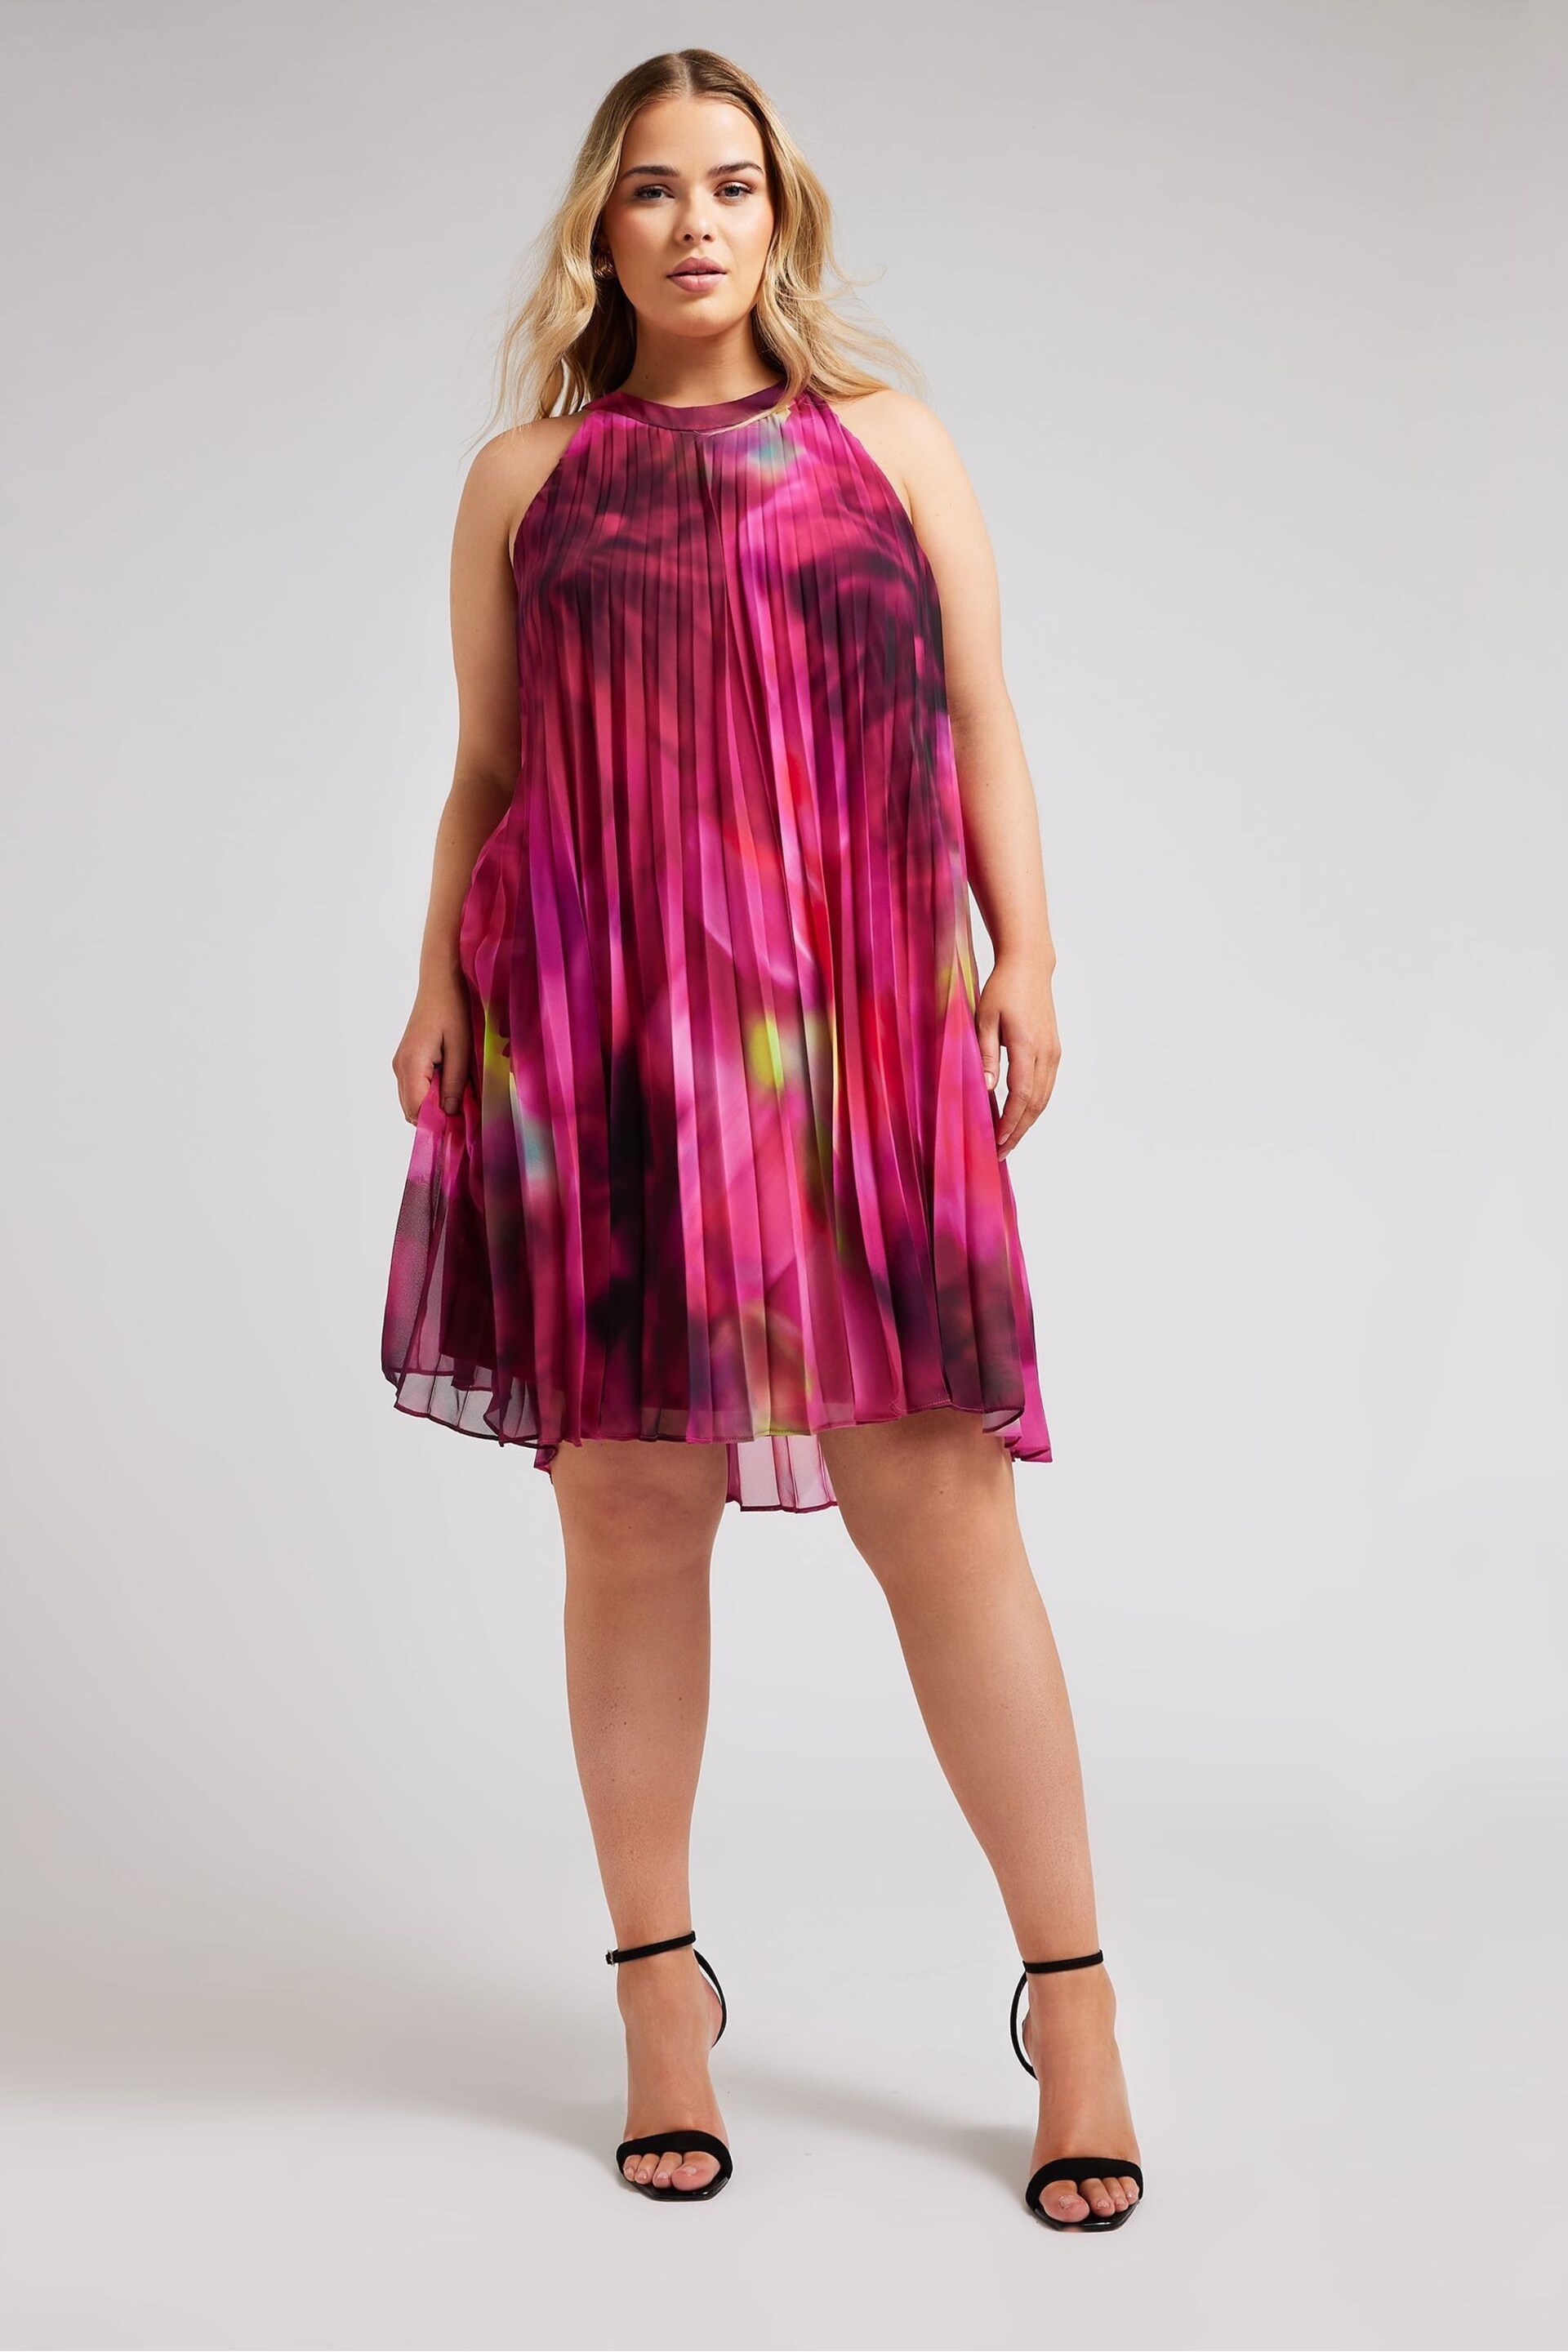 Yours Curve Pink Tropical Print Halter Neck Dress - Image 2 of 5